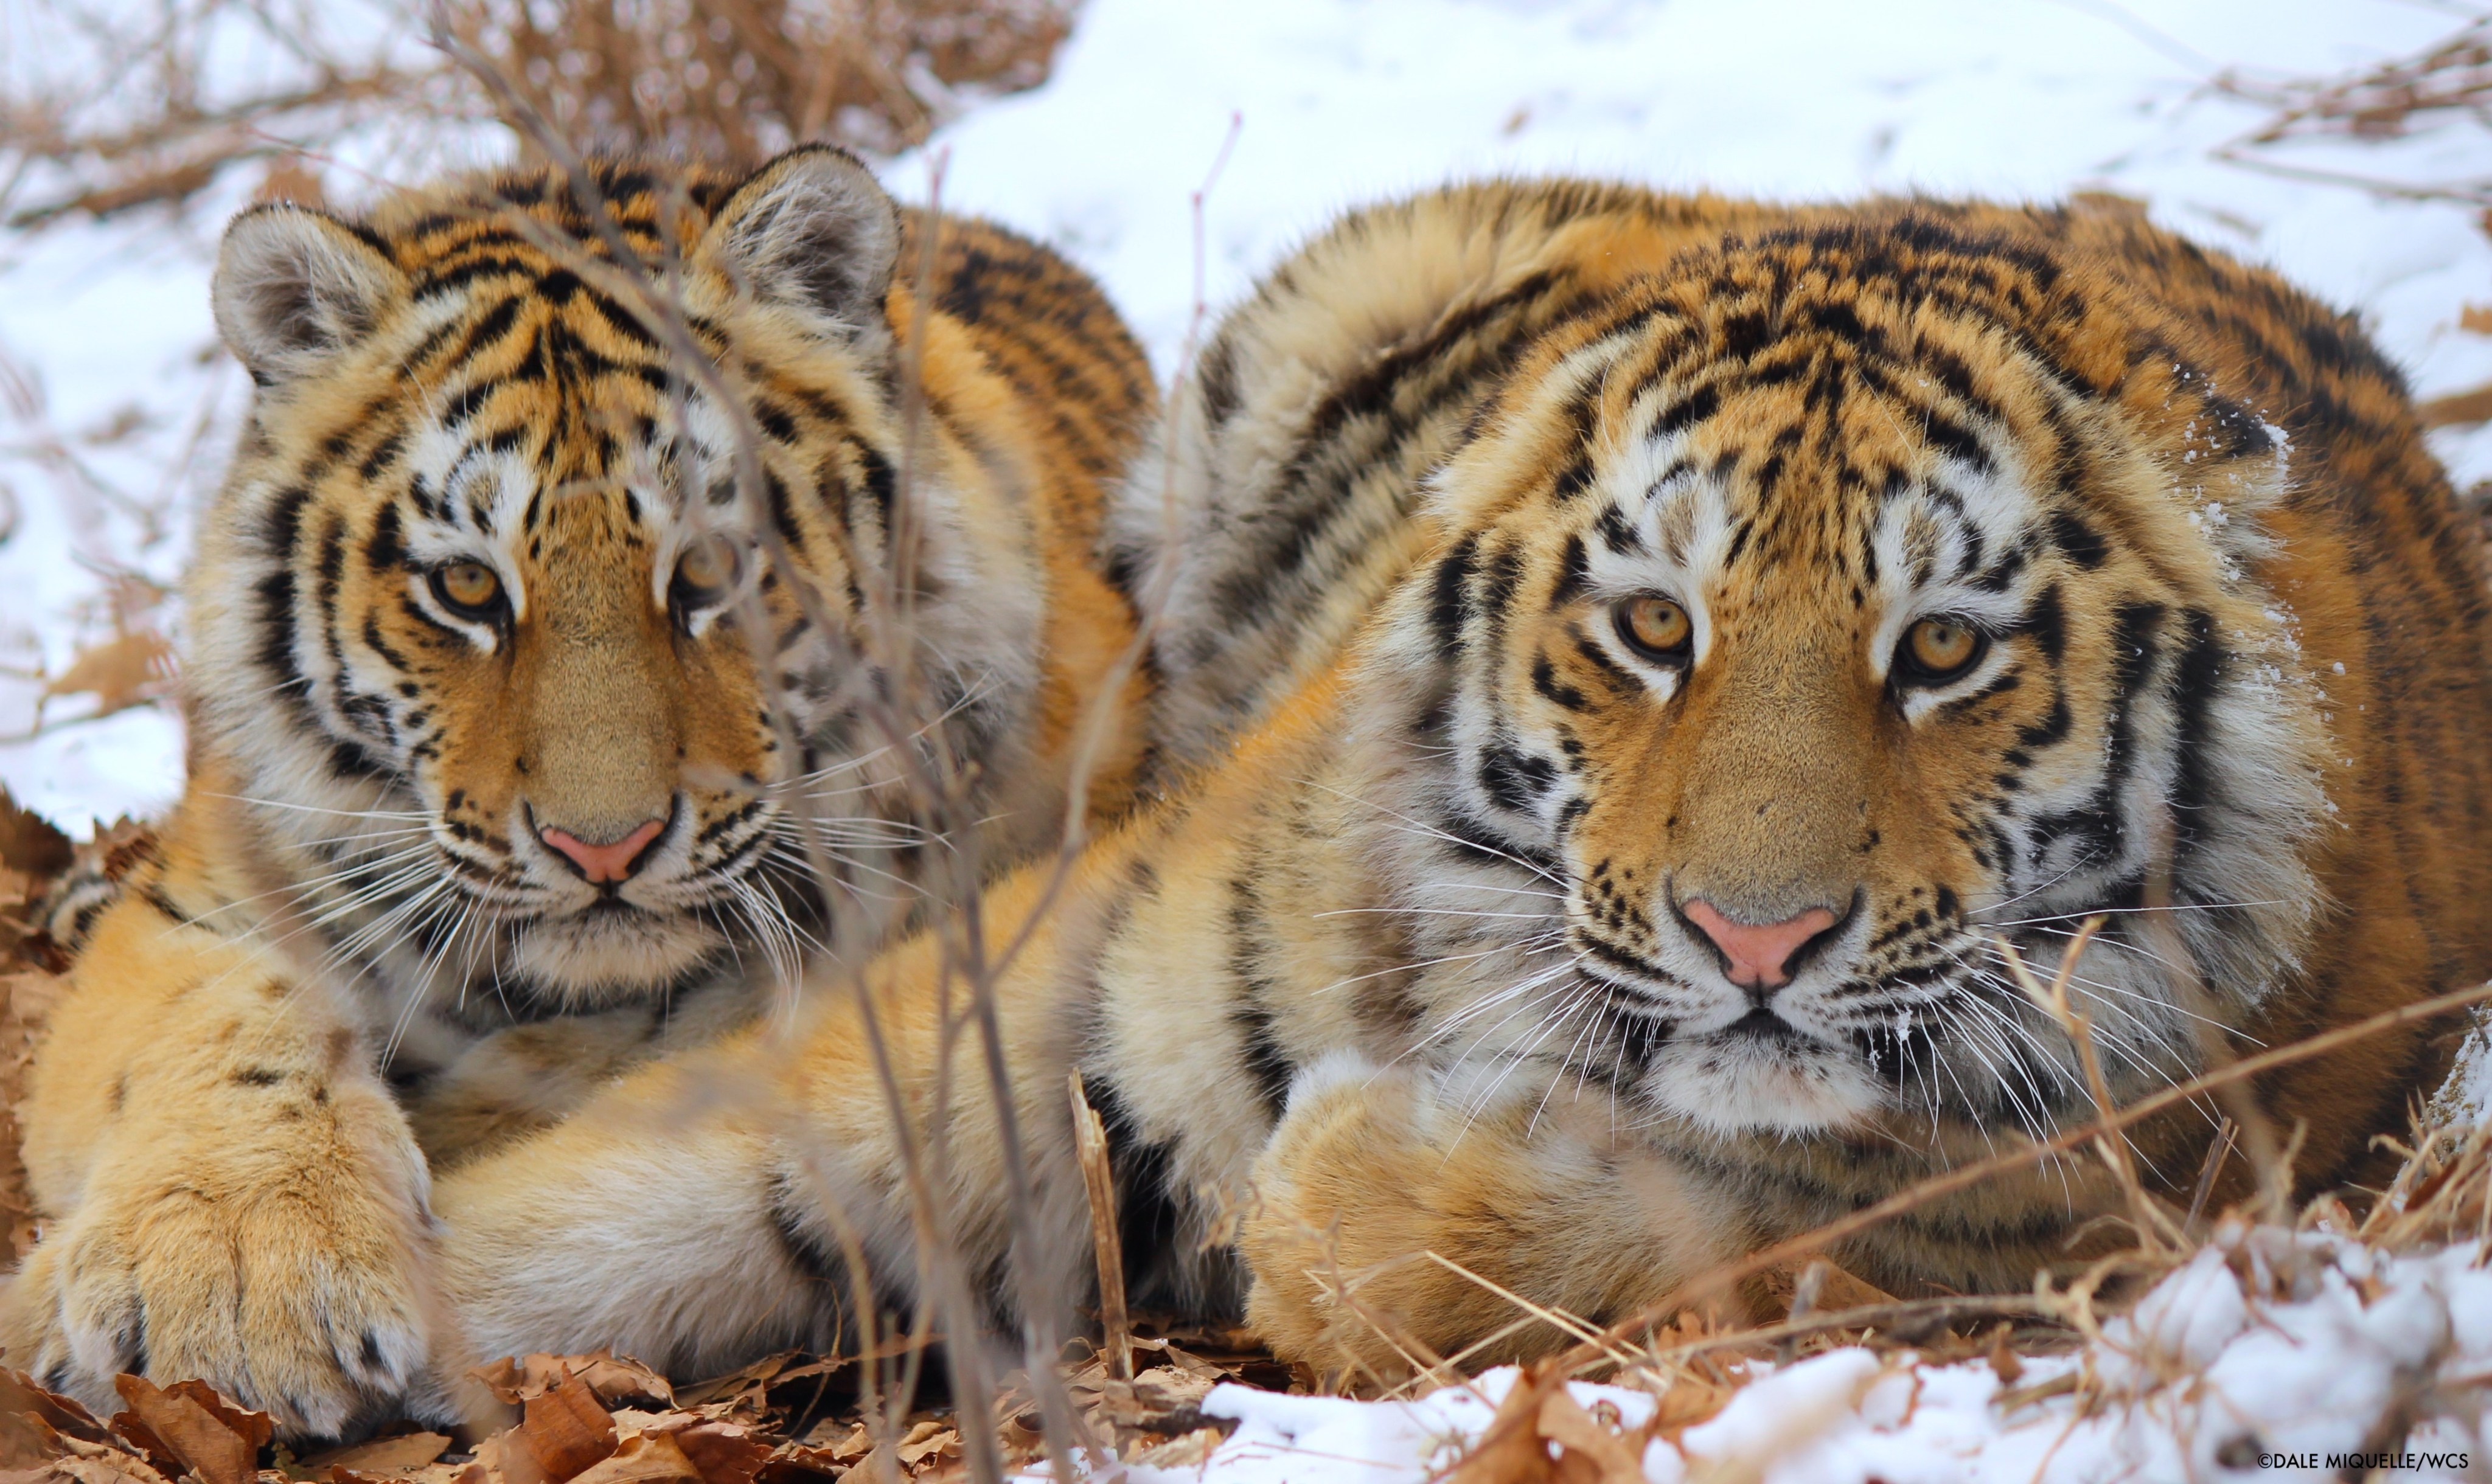 Two orange n' black-striped tigers rest on they bellies up in snow n' look directly all up in tha camera.